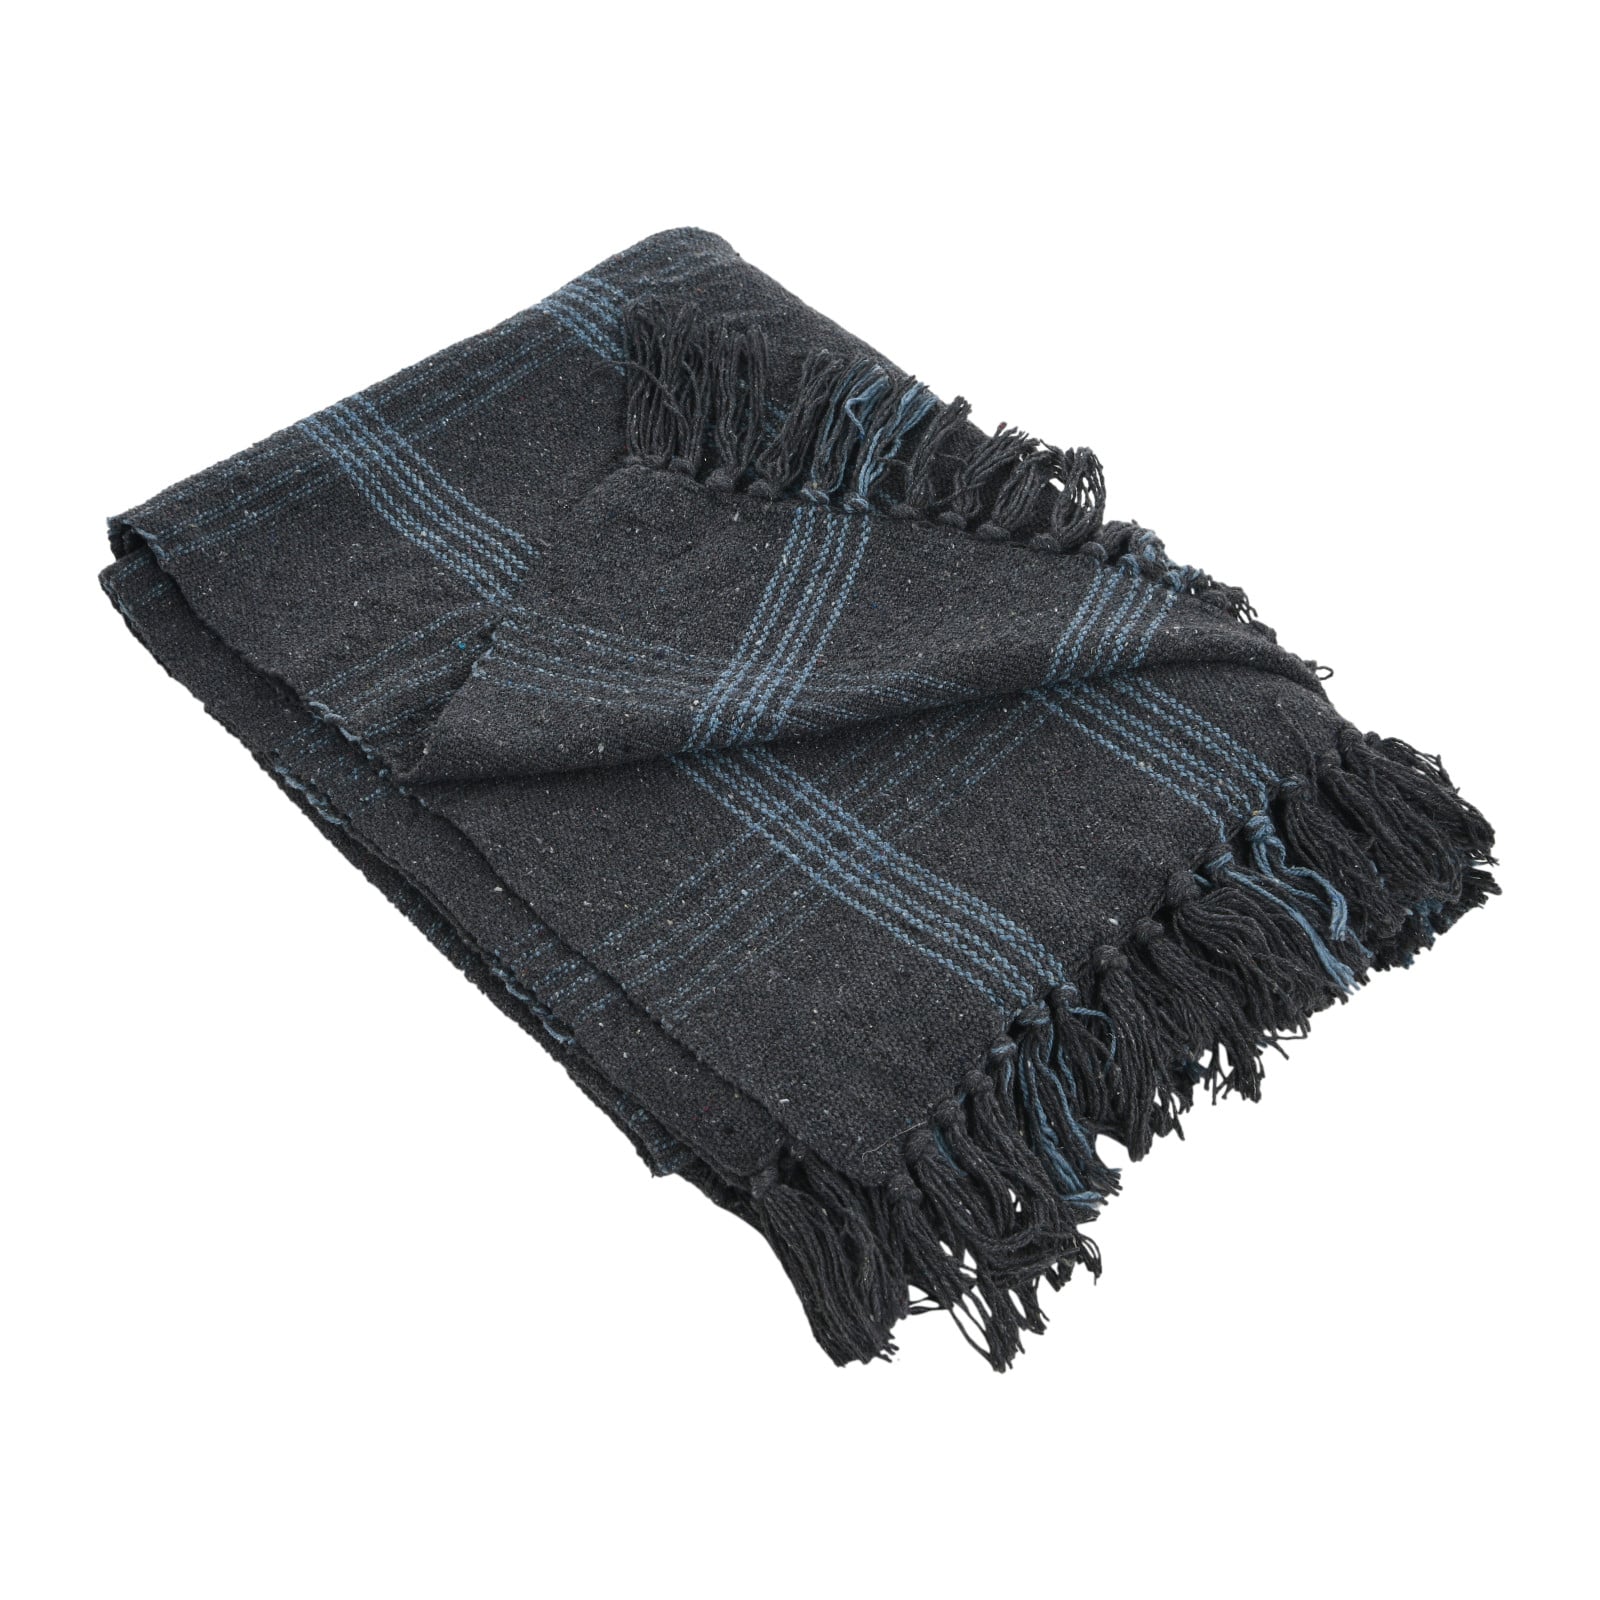 Plaid Recycled Cotton Blend Throw Blanket with Fringe